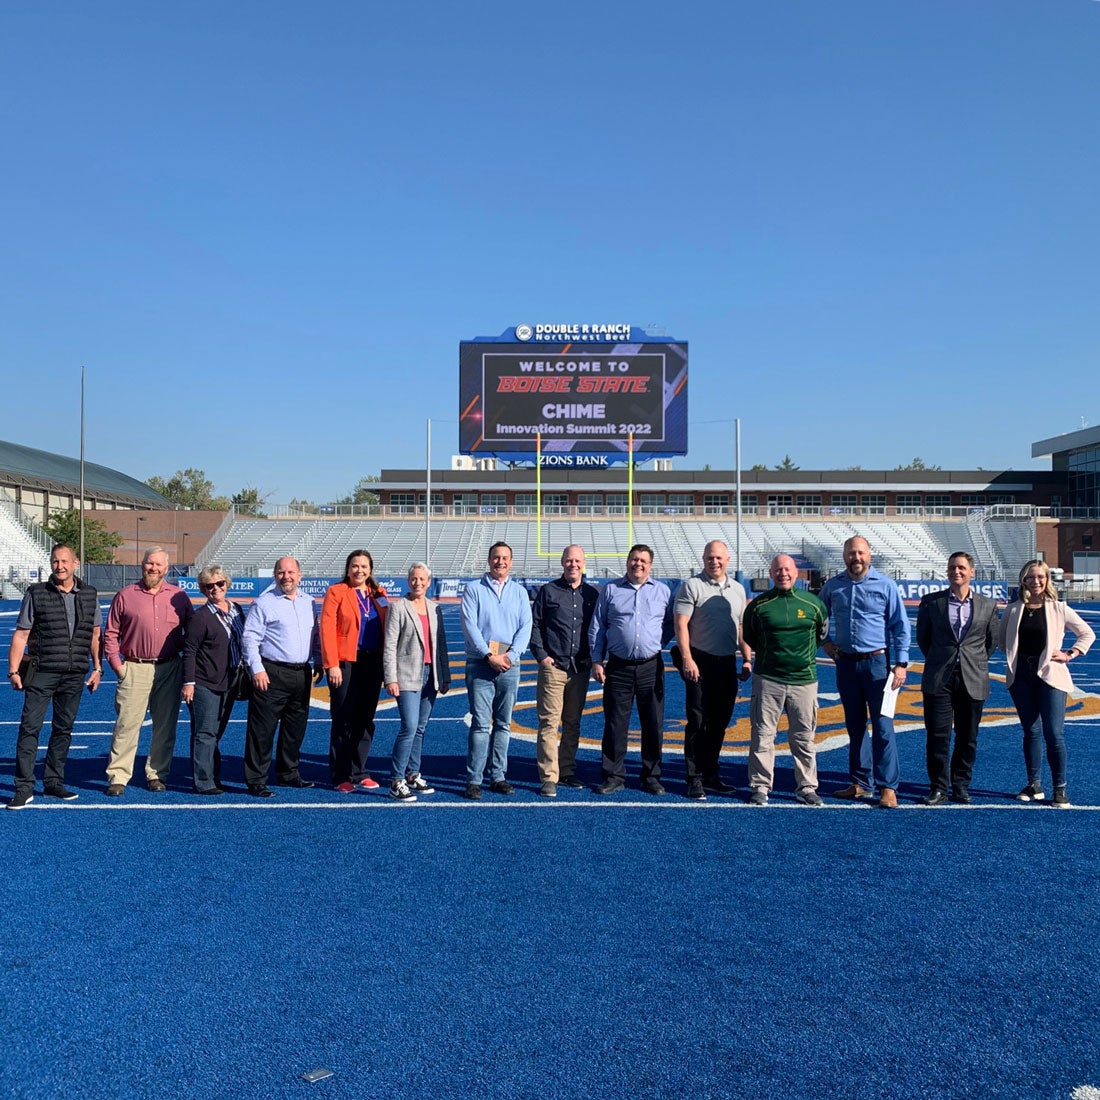 Members of the Innovation Summit stand in the middle of the Blue Turf field.